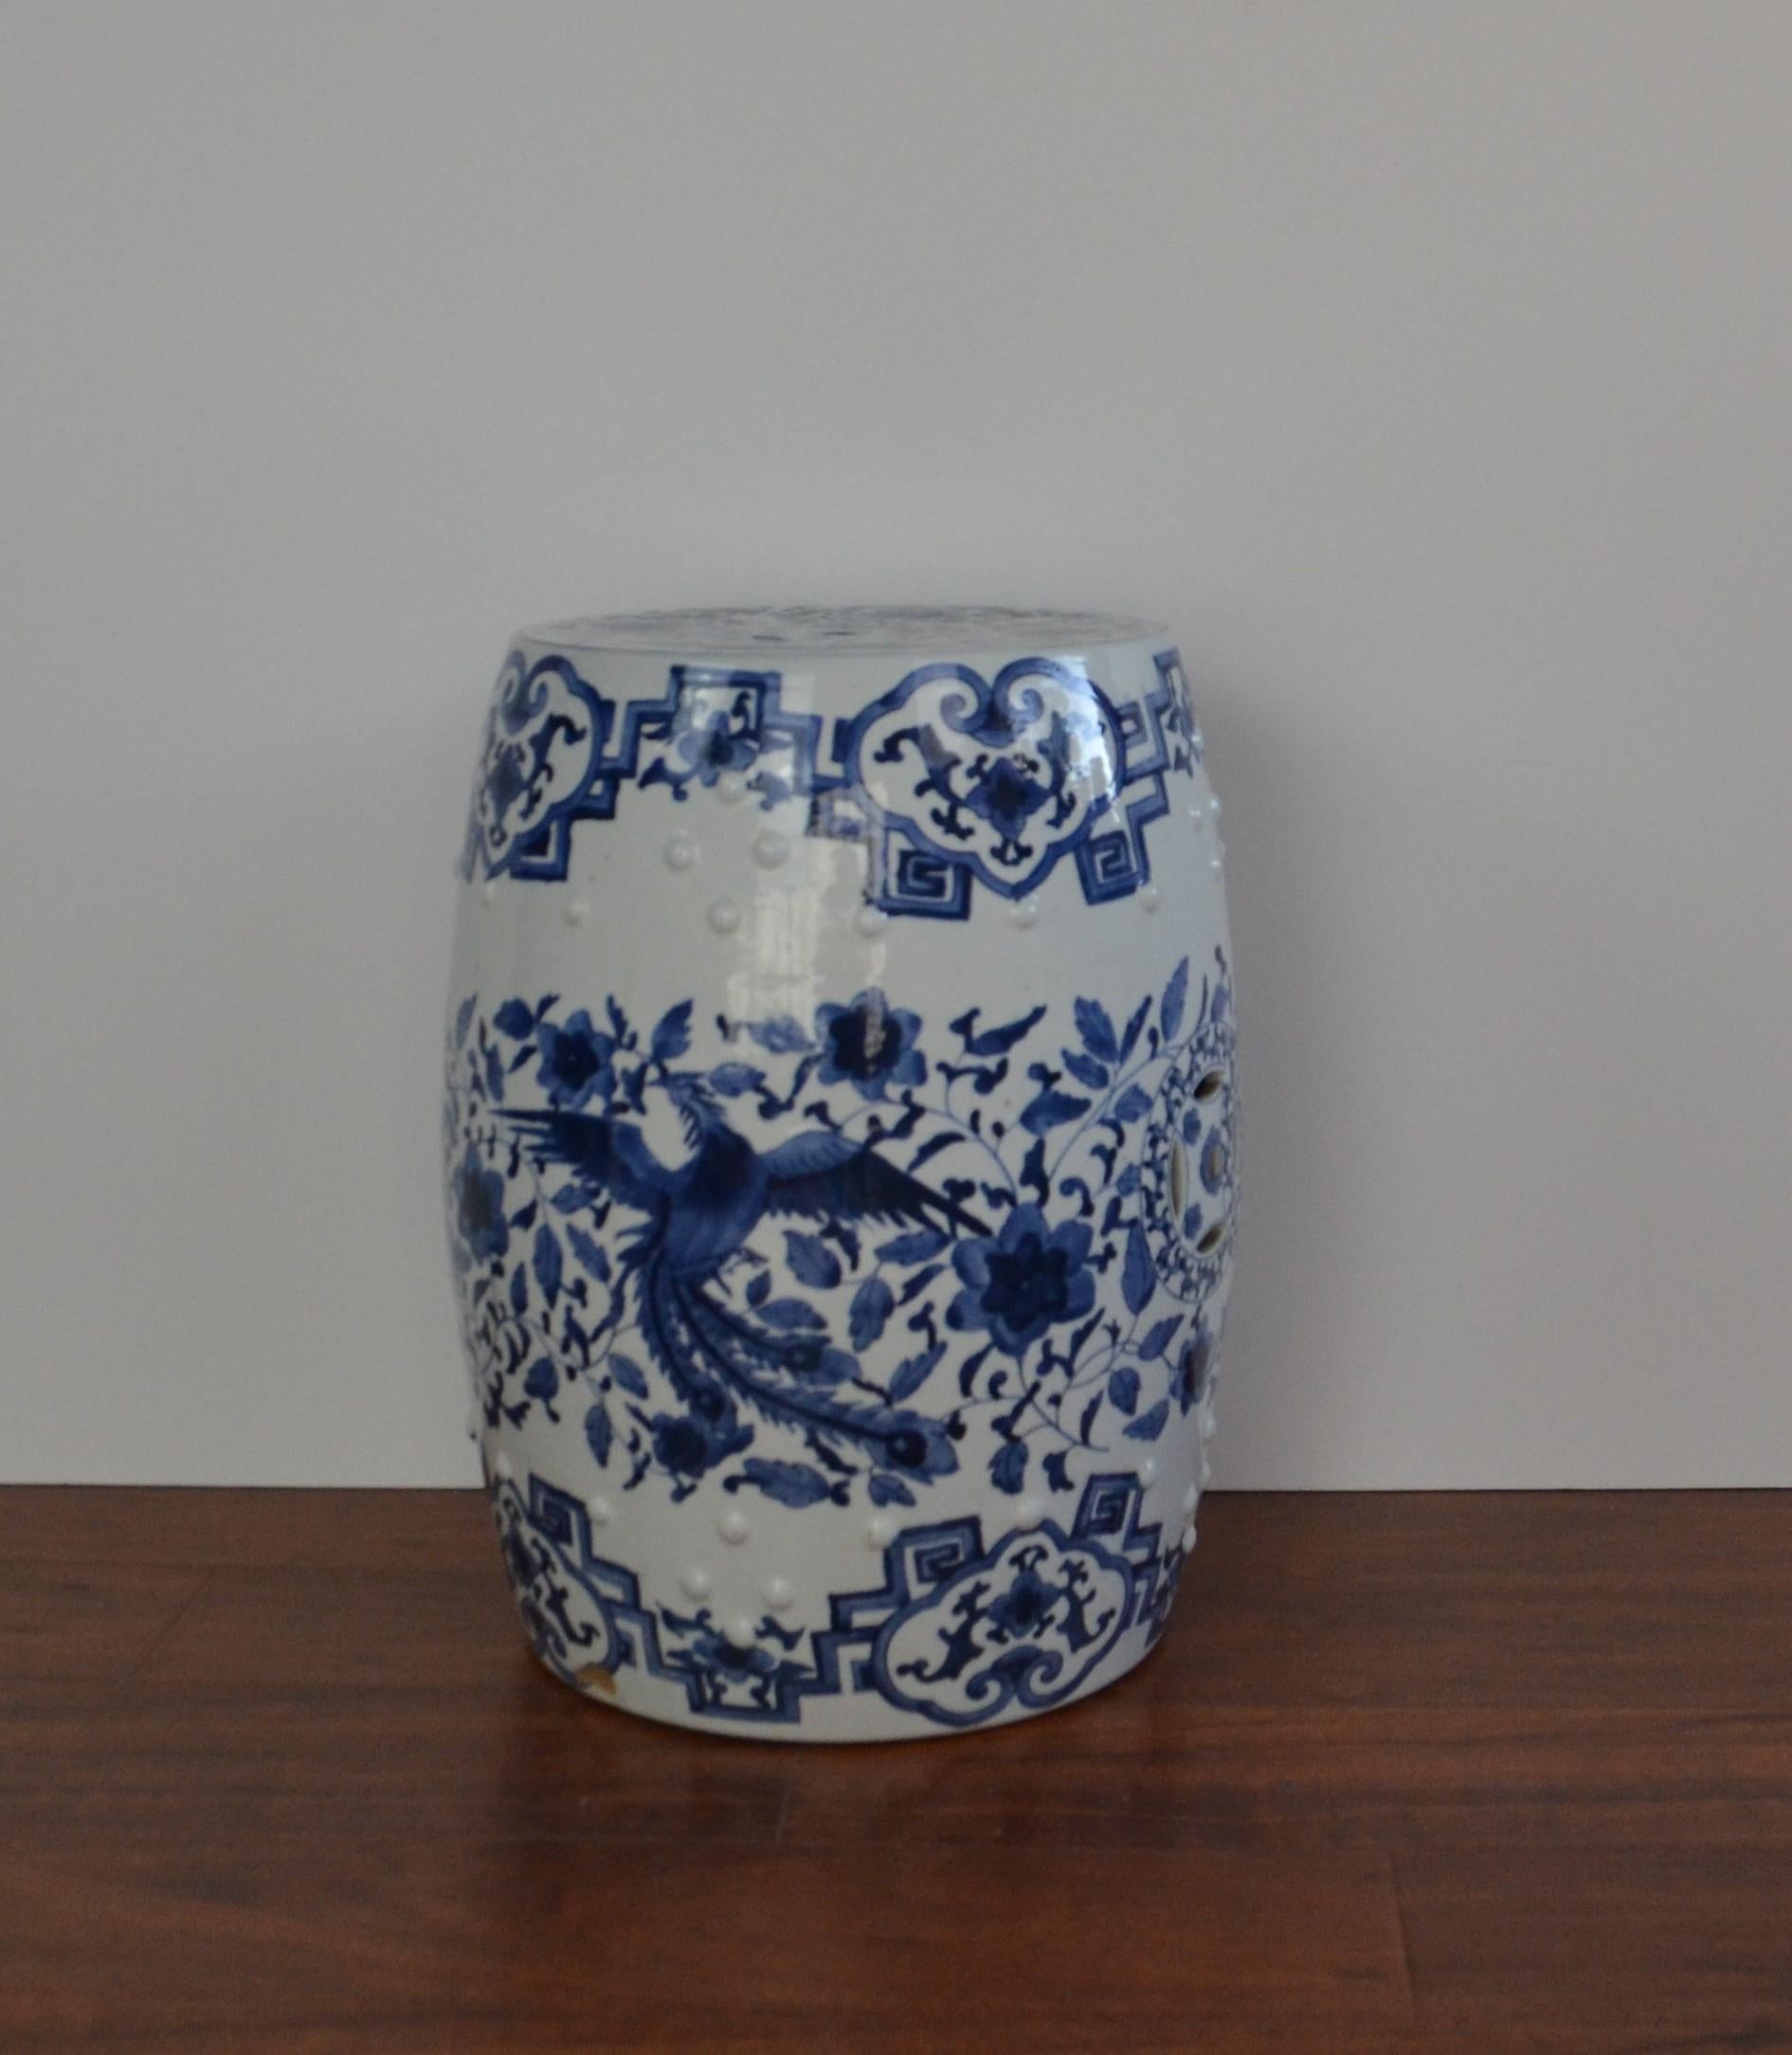 Hand painted blue and white Asian garden stool.